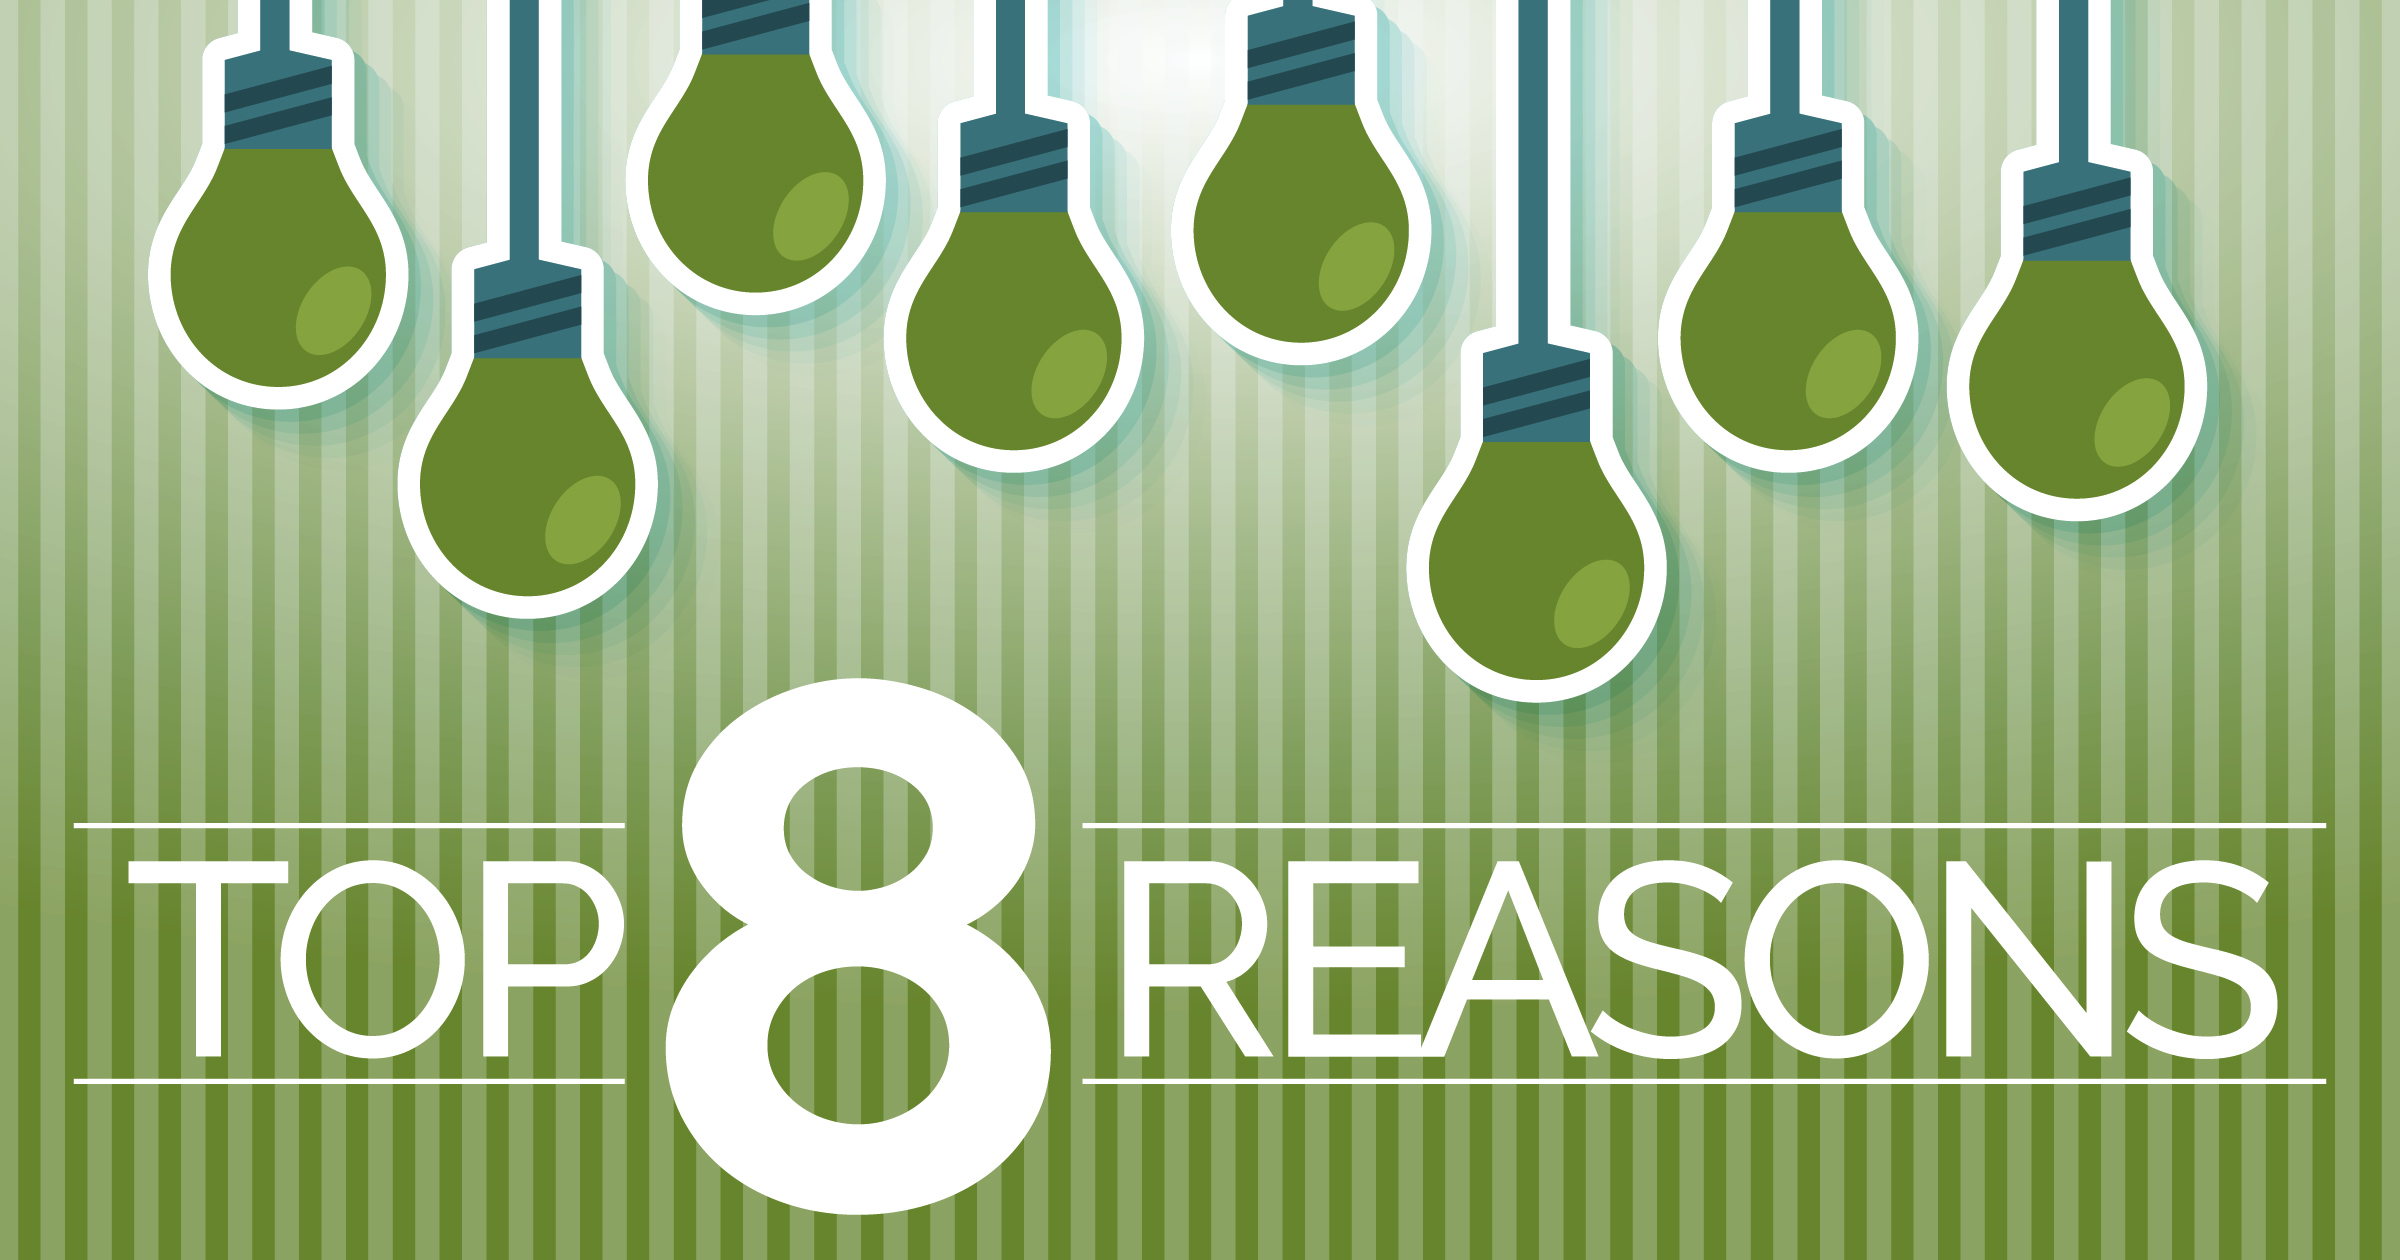 Top 8 Reasons You Should Be Gifting Now